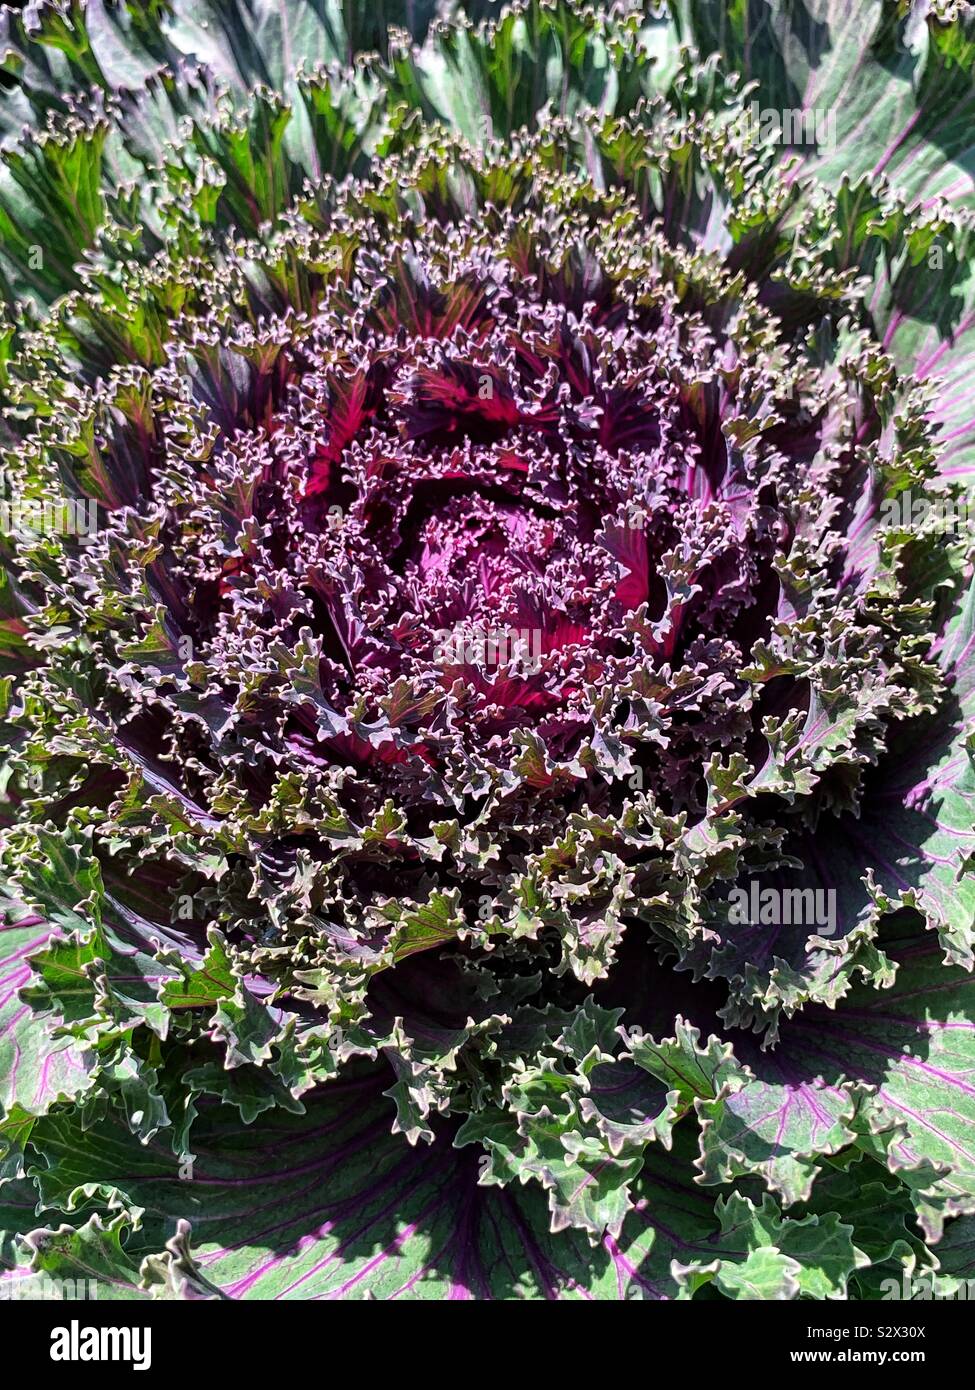 Fresh cabbage and kale growing in full bloom. Stock Photo